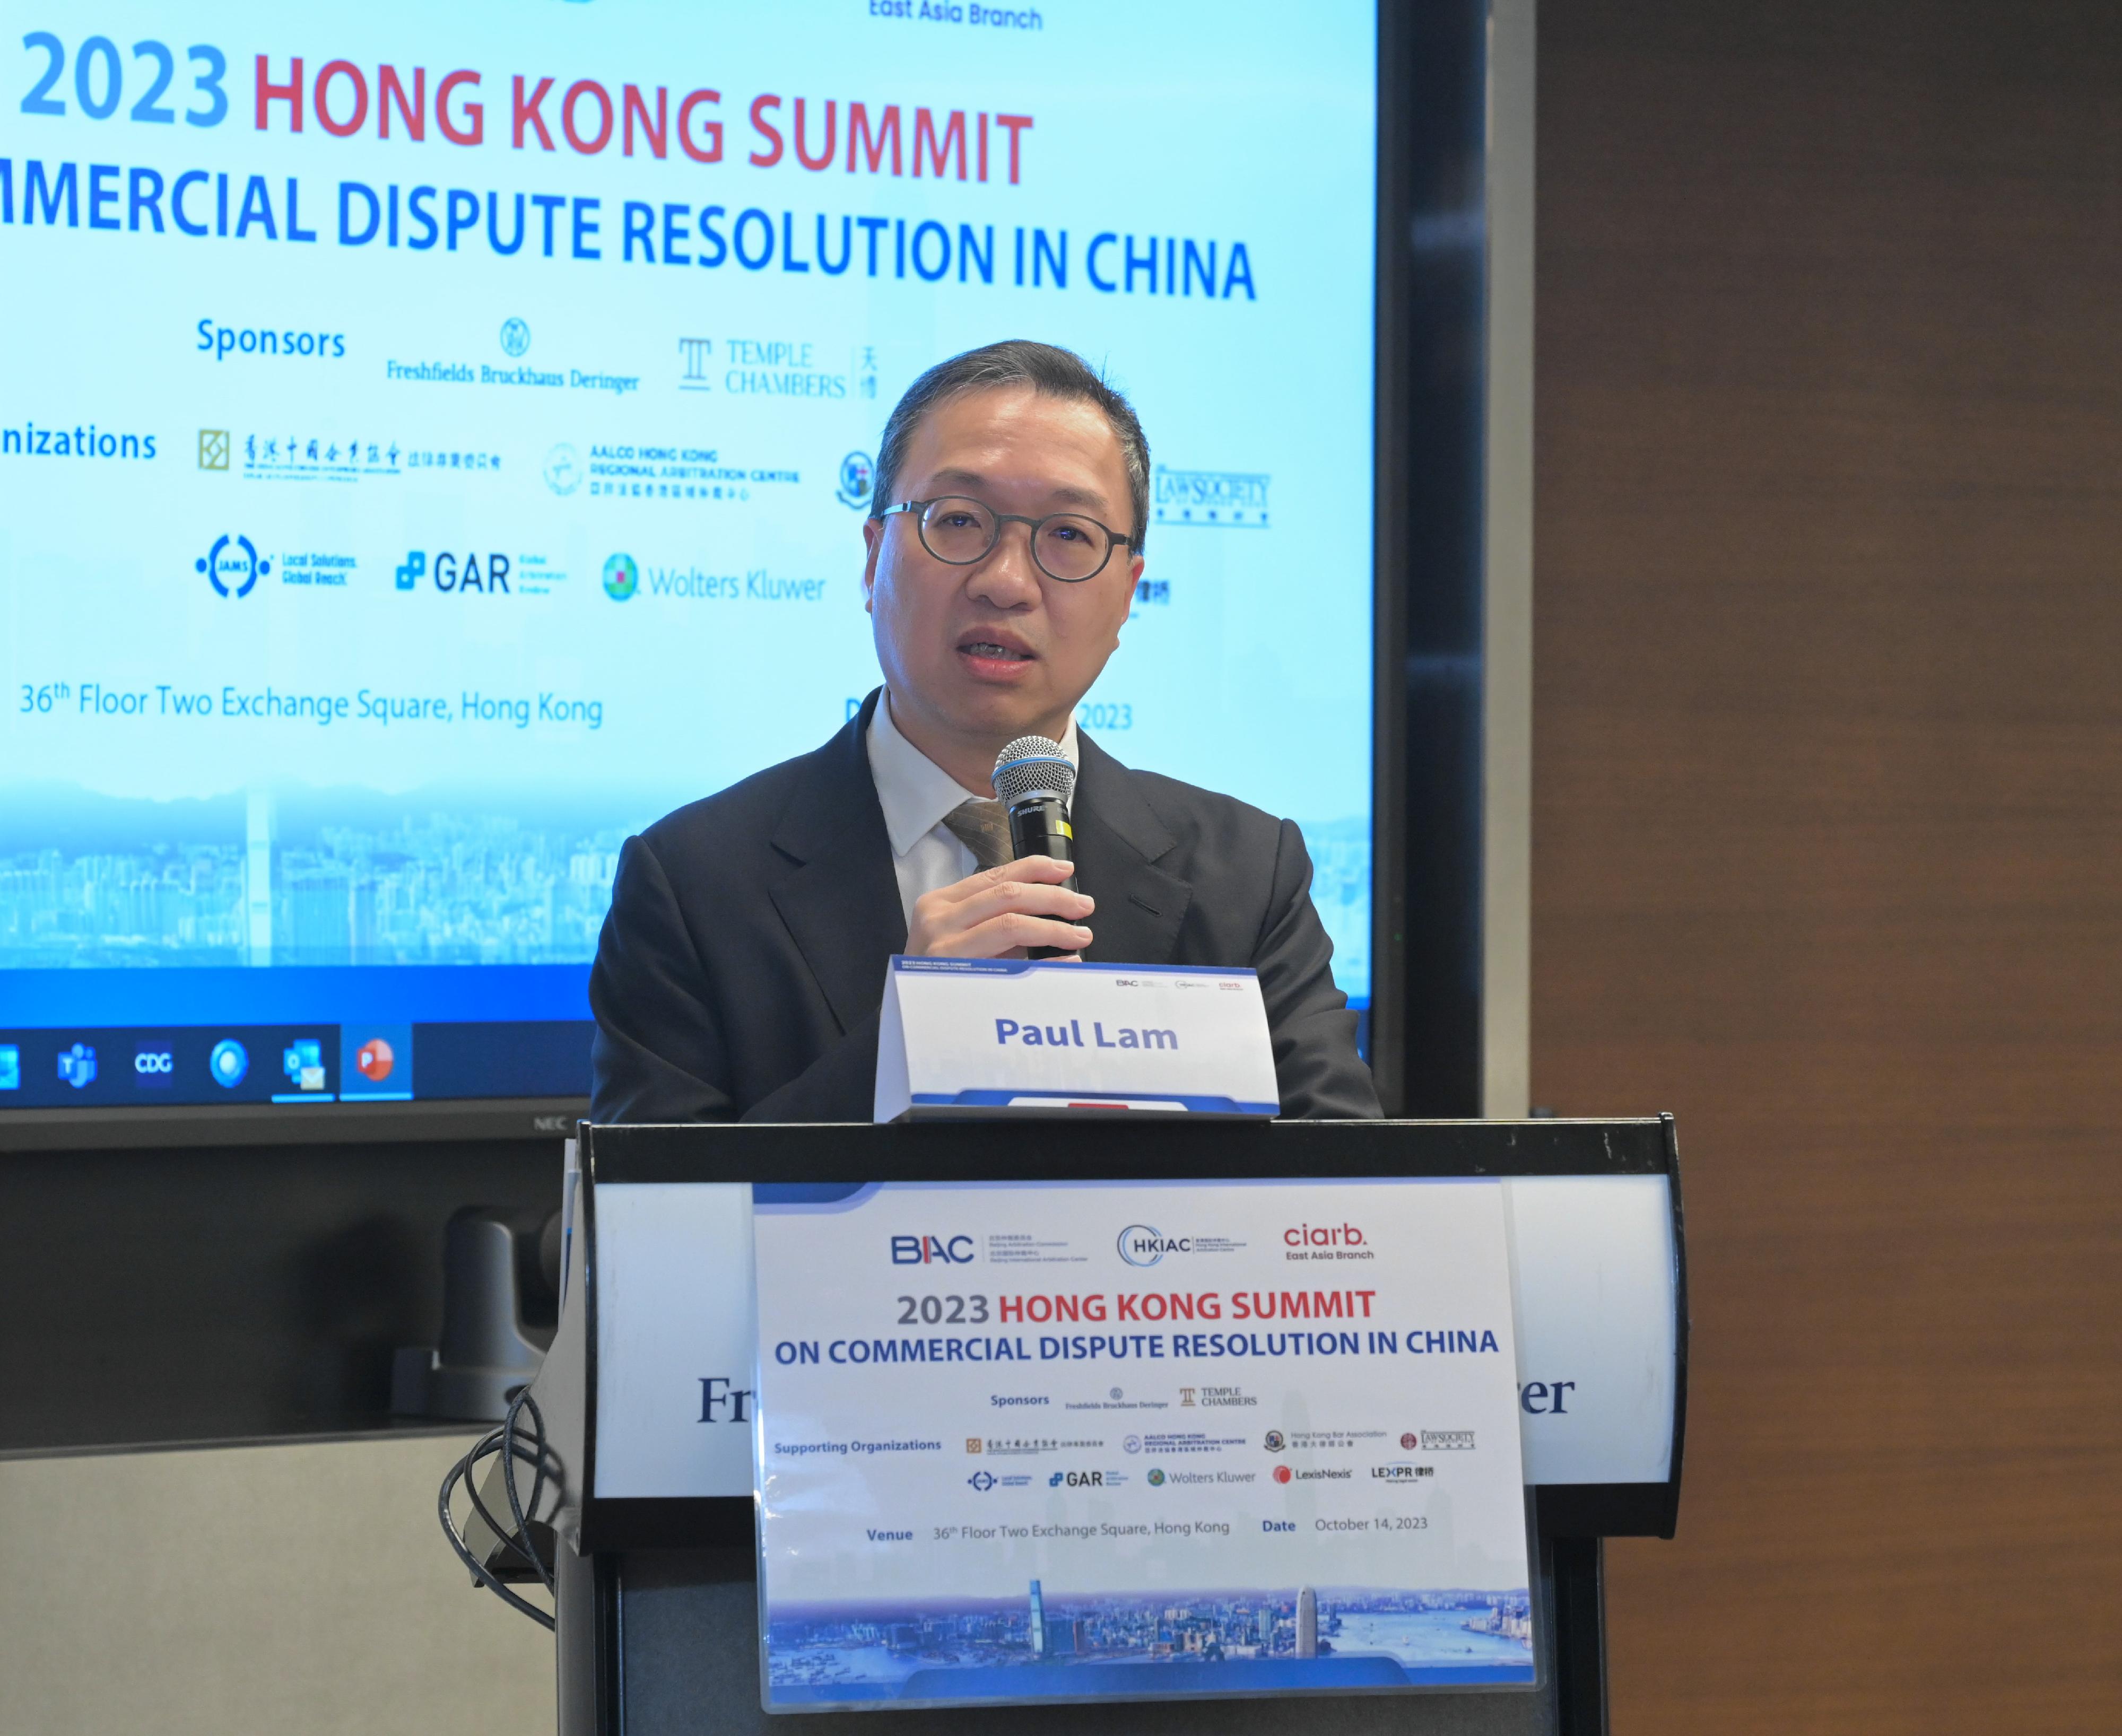 The Secretary for Justice, Mr Paul Lam, SC, speaks at the 2023 Hong Kong Summit on Commercial Dispute Resolution in China today (October 14).
